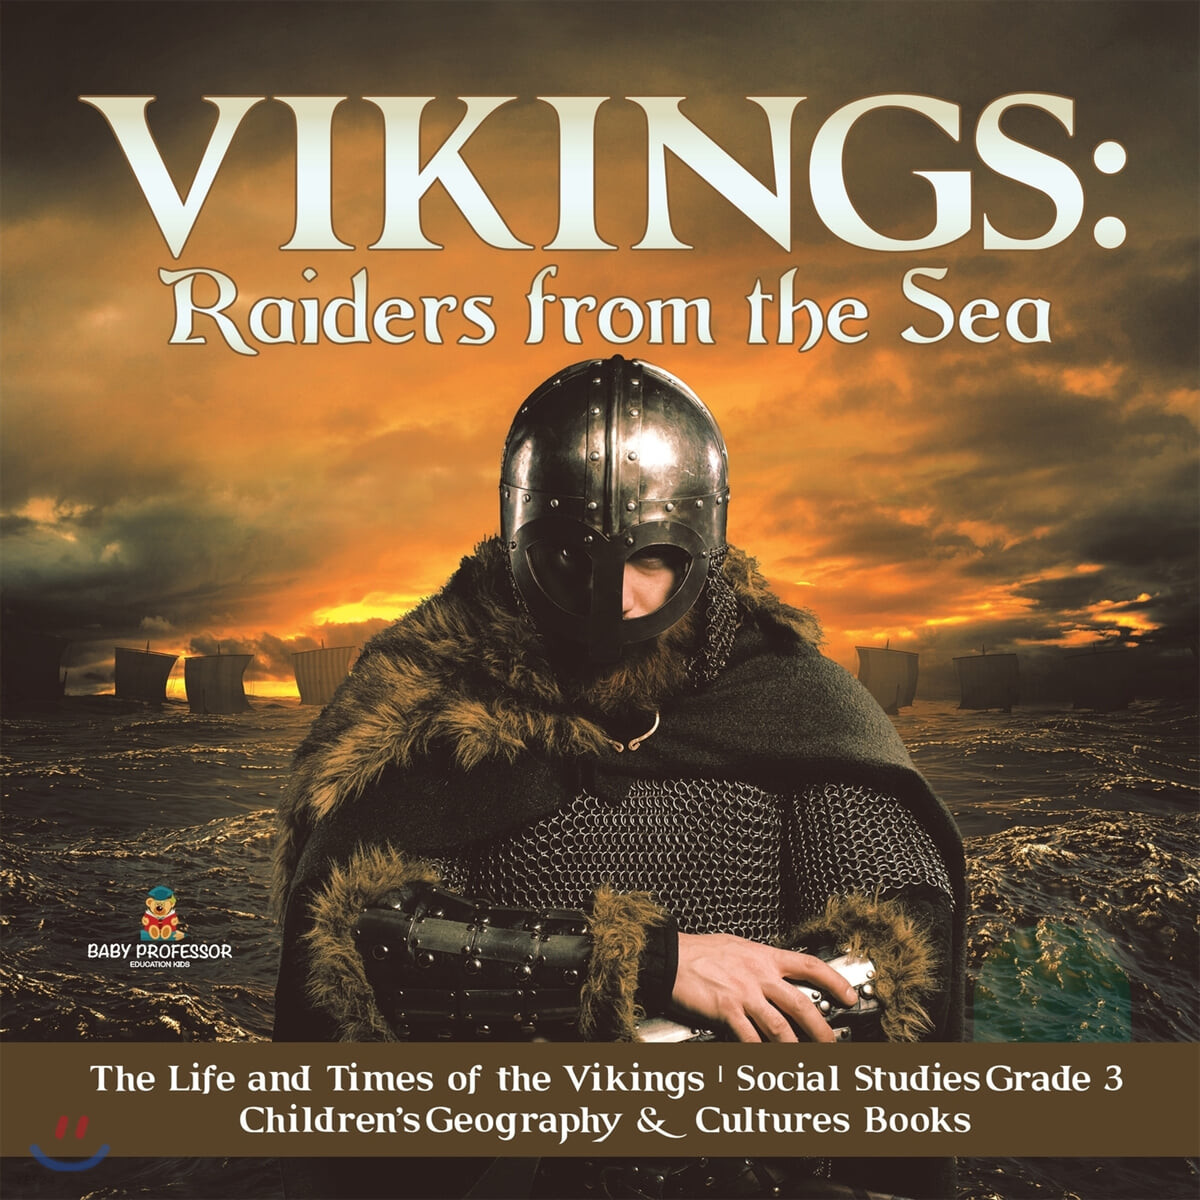 Vikings (Raiders from the Sea | The Life and Times of the Vikings | Social Studies Grade 3 | Children’s Geography & Cultures Books)